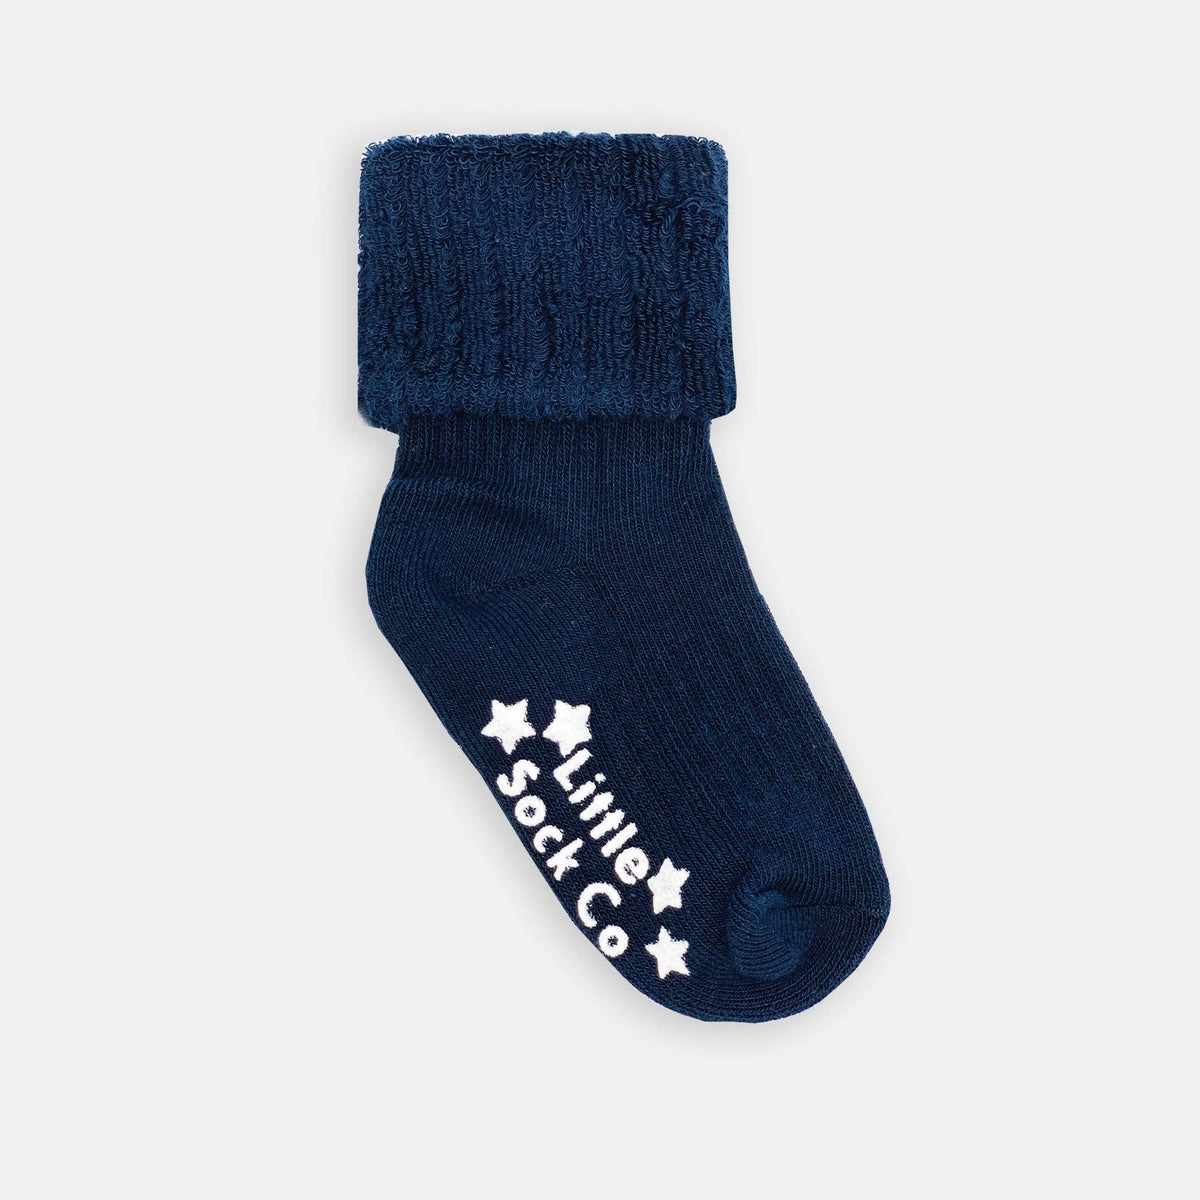 Cosy Stay-On Non-Slip Baby Socks in Navy: 6-12 months